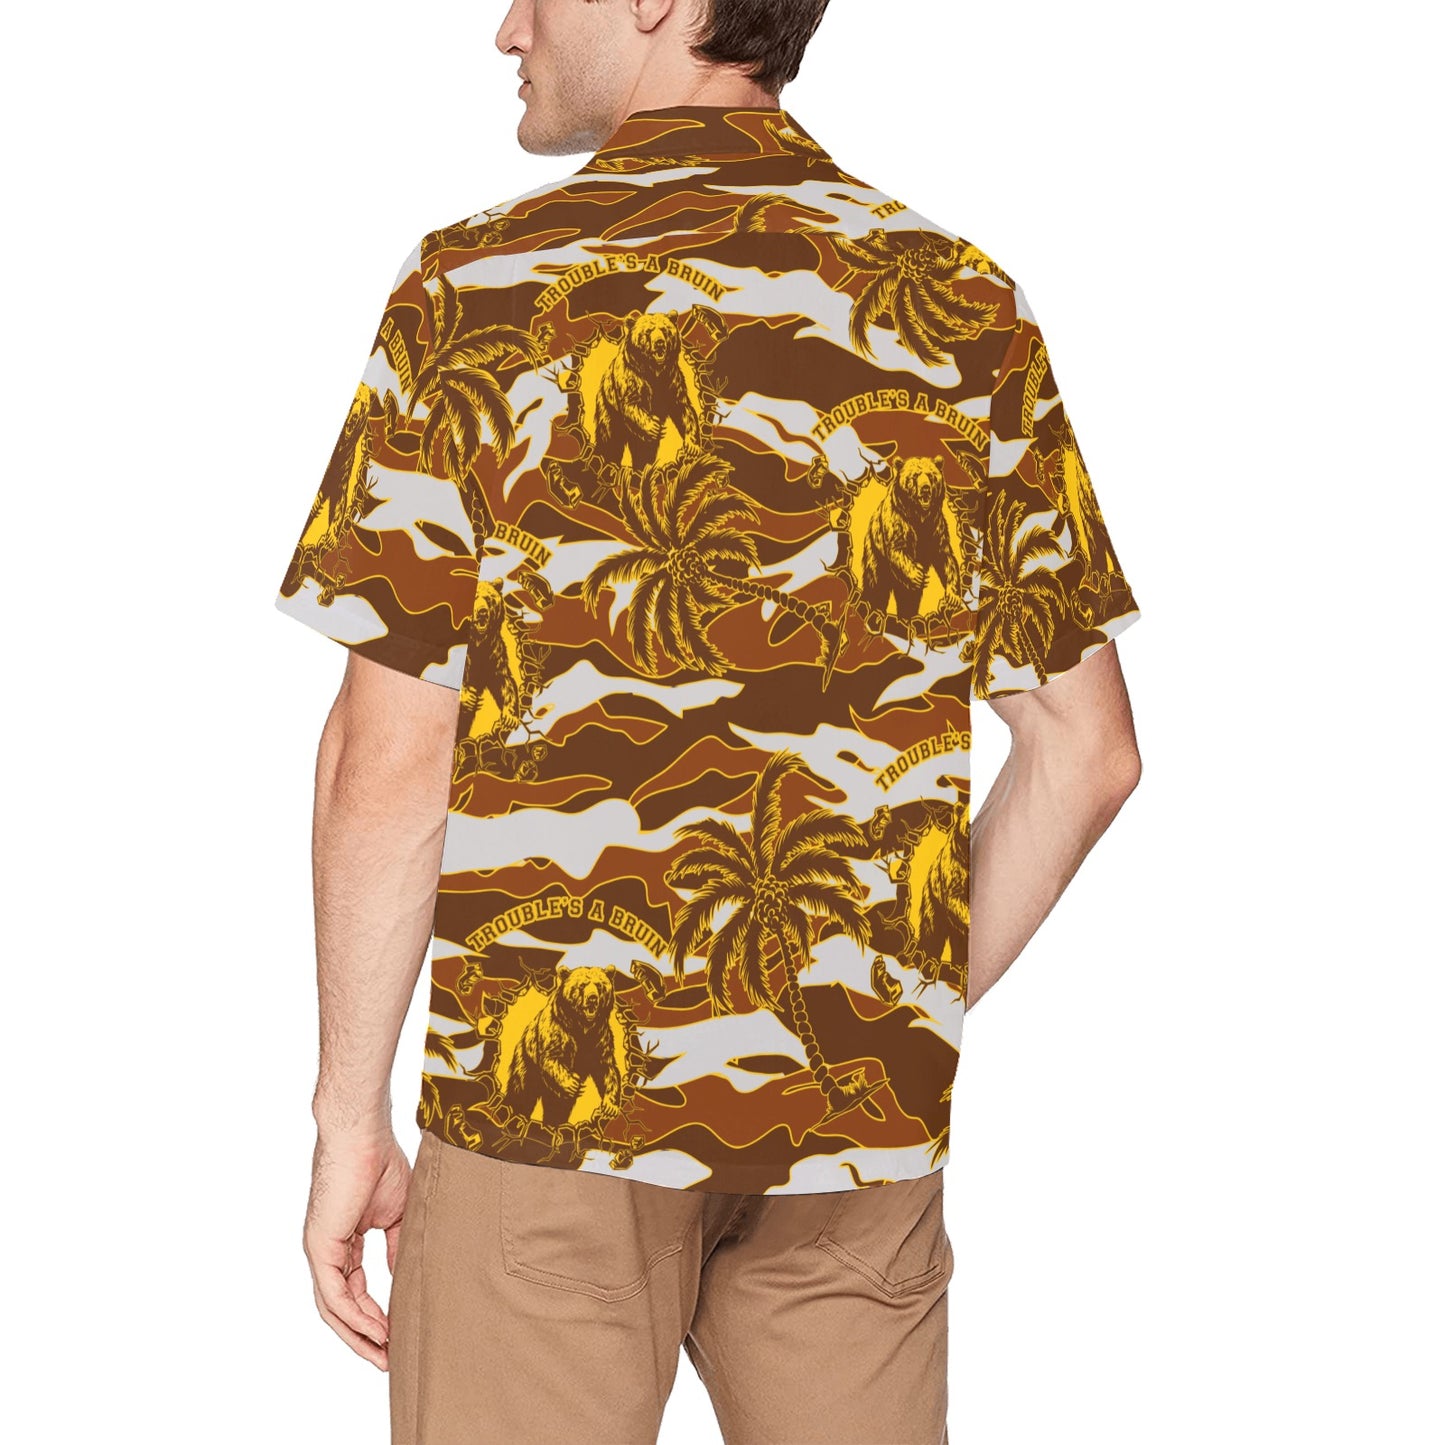 Fargo South High Troubles A Bruin Updated Bear Brick Wall Tiger Stripe Brown Camouflage With Gold Color Palm Trees Hawaiian Shirt With Left Chest Pocket